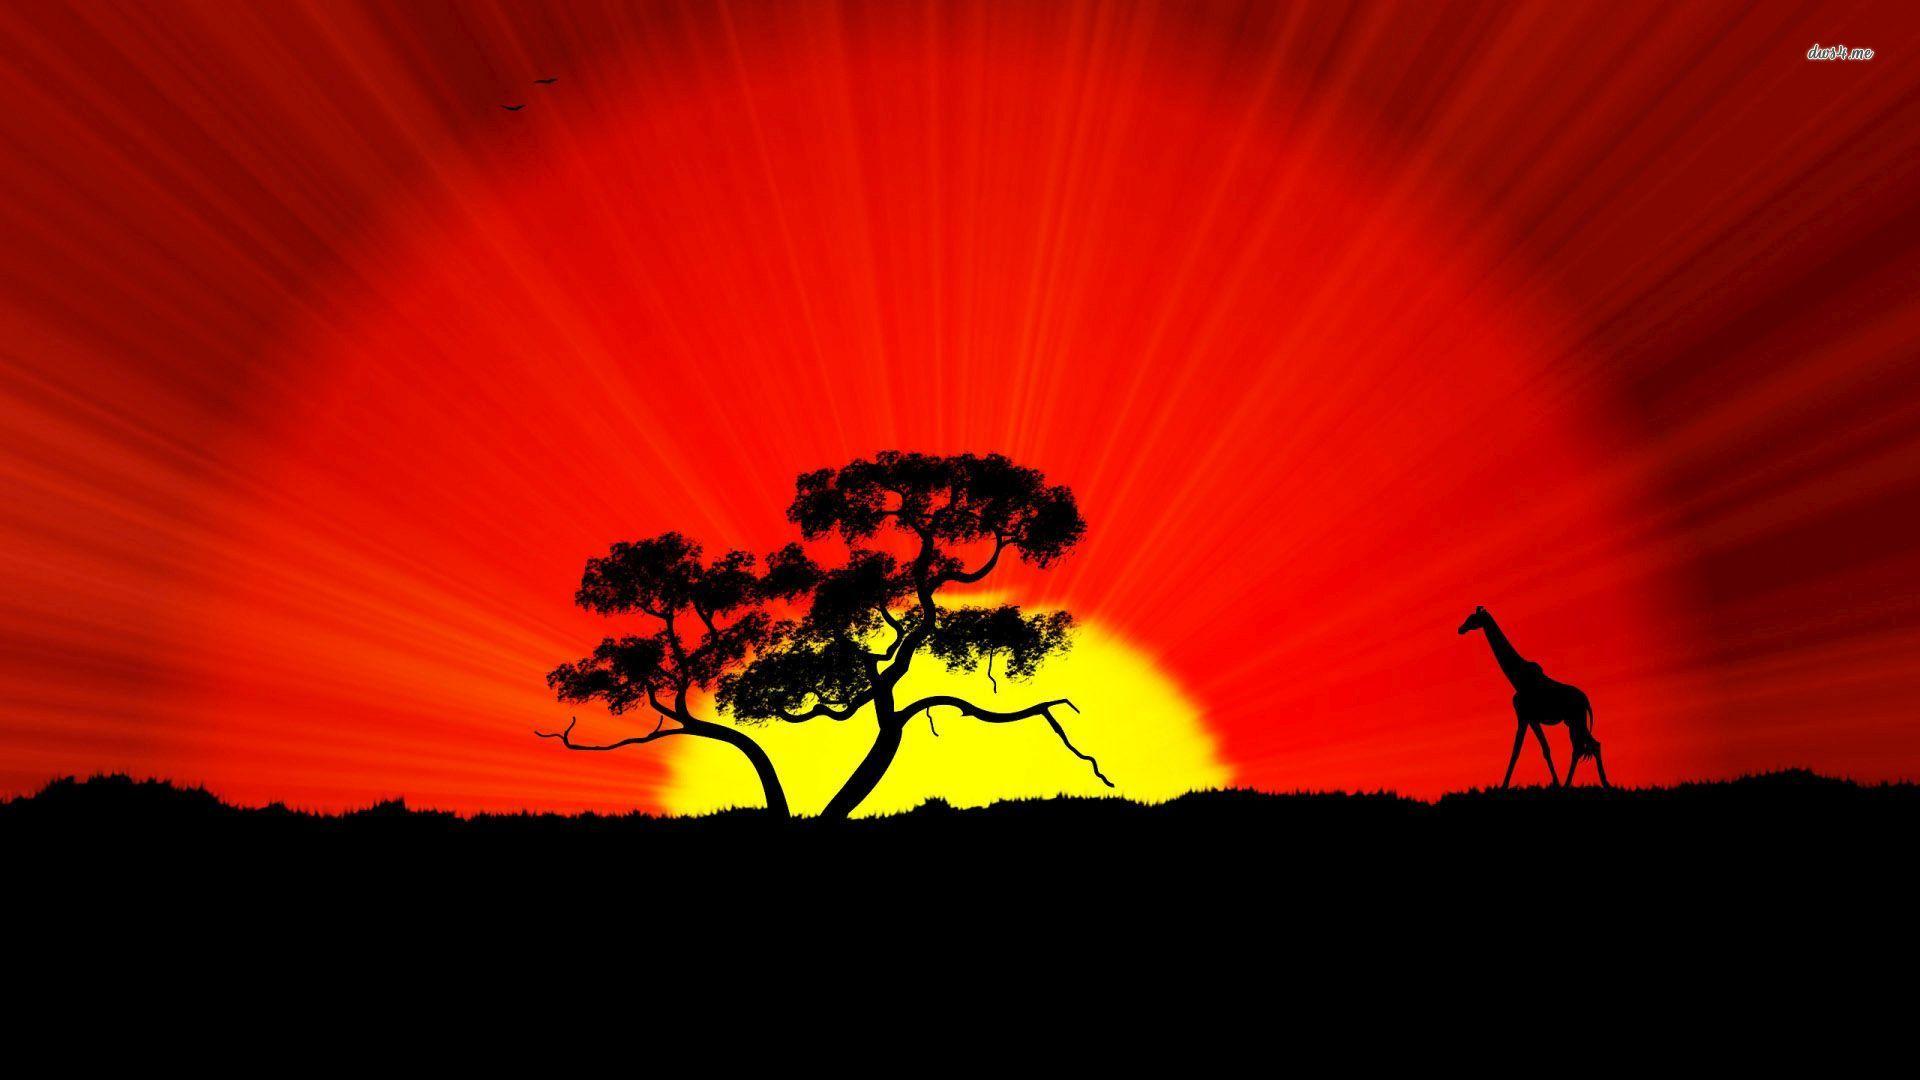 Africa at Sunset wallpapers